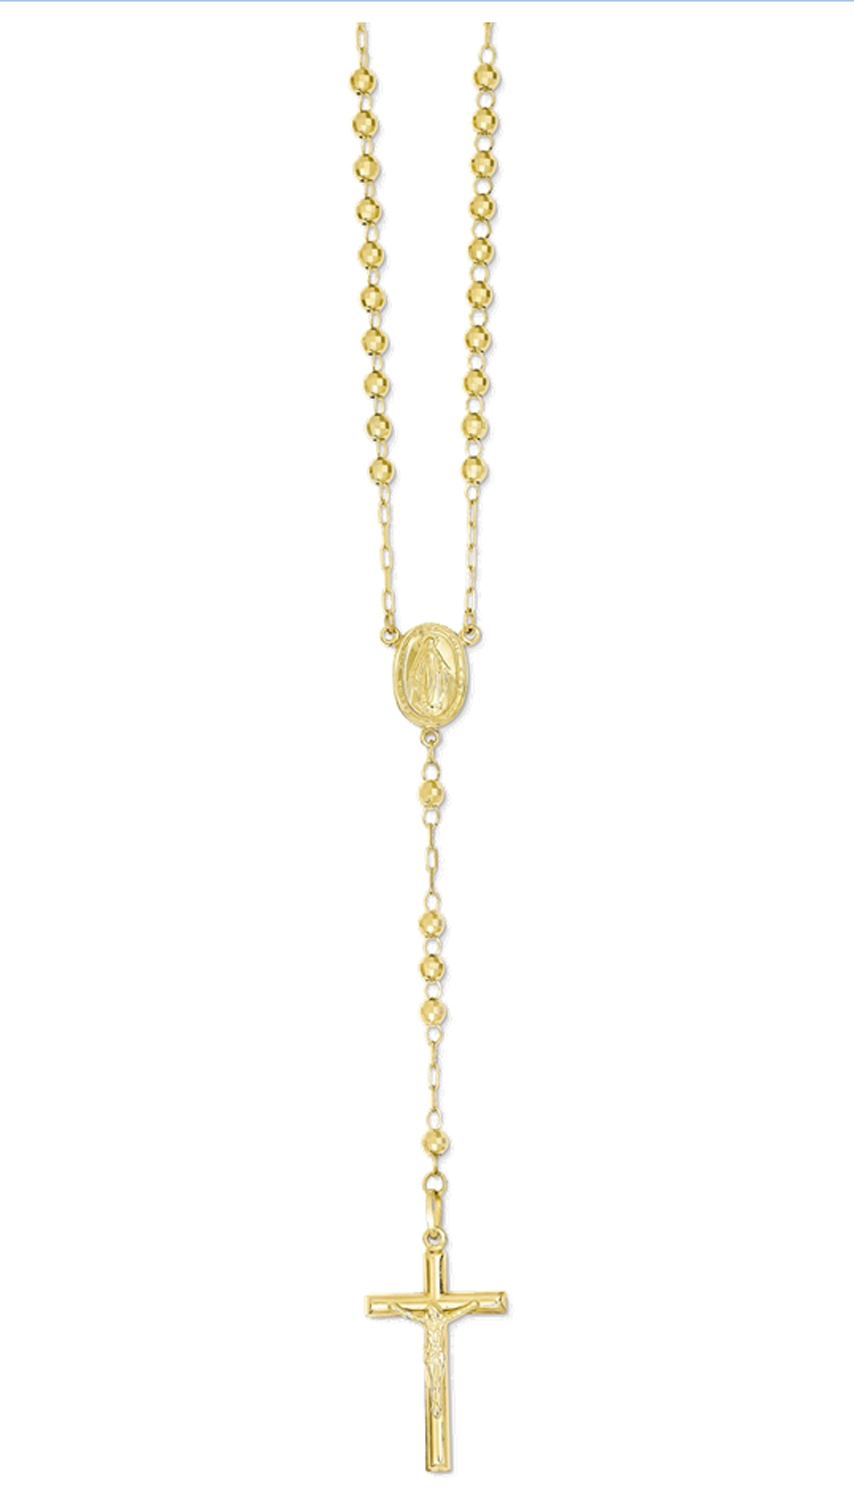 14k Yellow Gold Rosary Bead Necklace, 24"